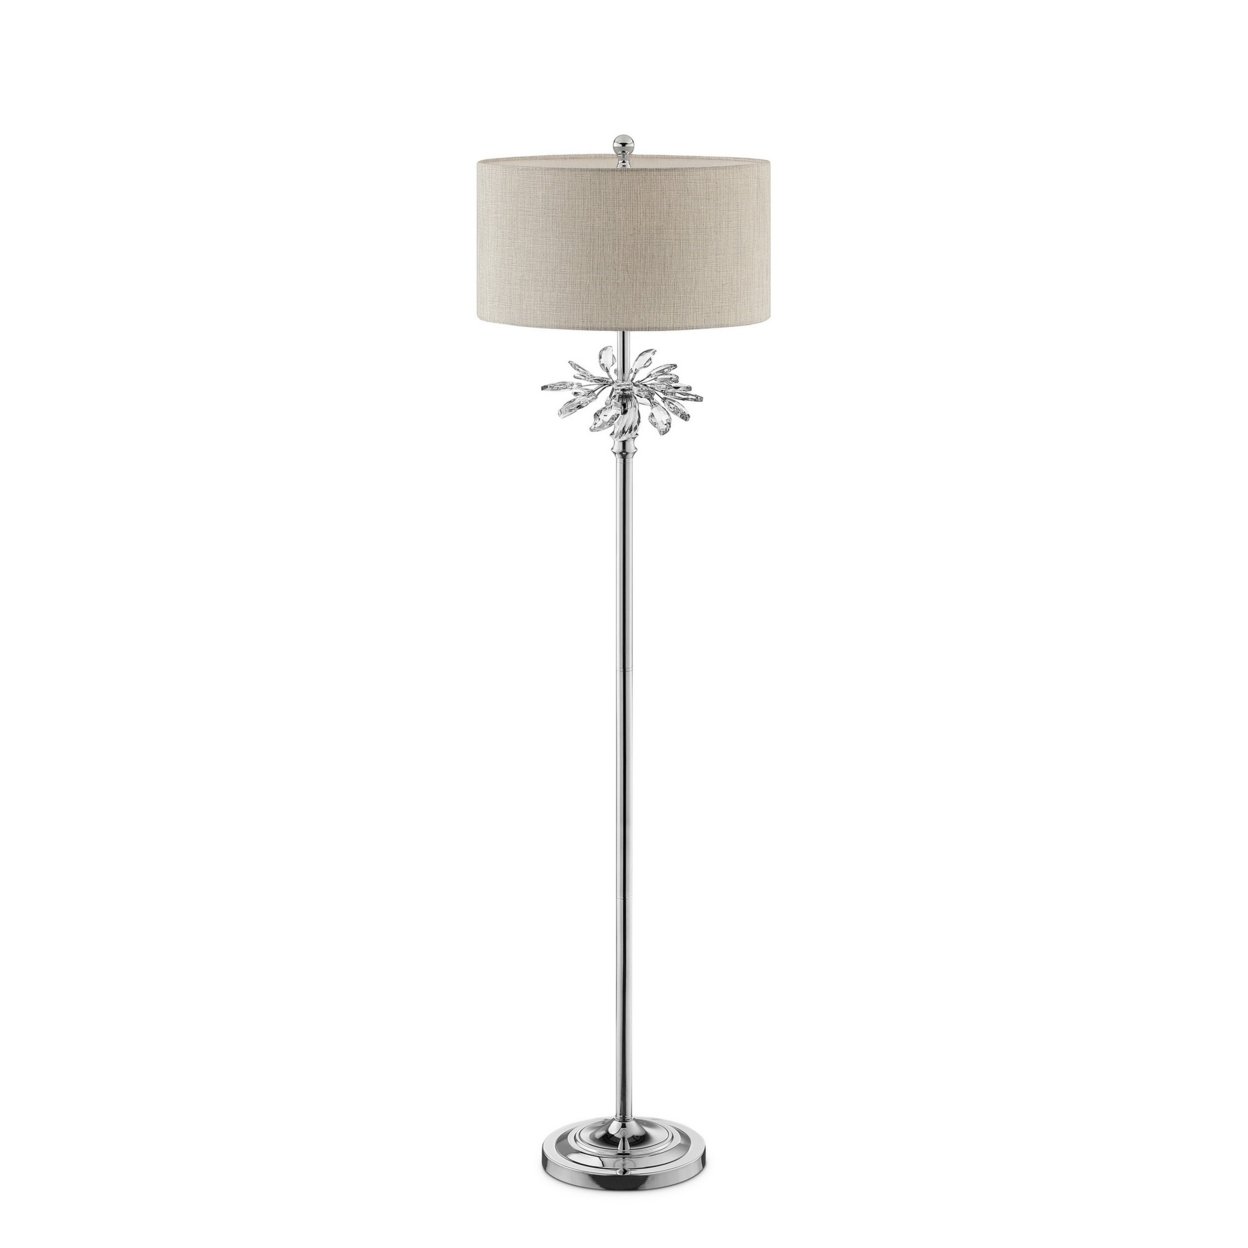 Floor Lamp With Starburst Crystal Accent, Gray And Silver- Saltoro Sherpi